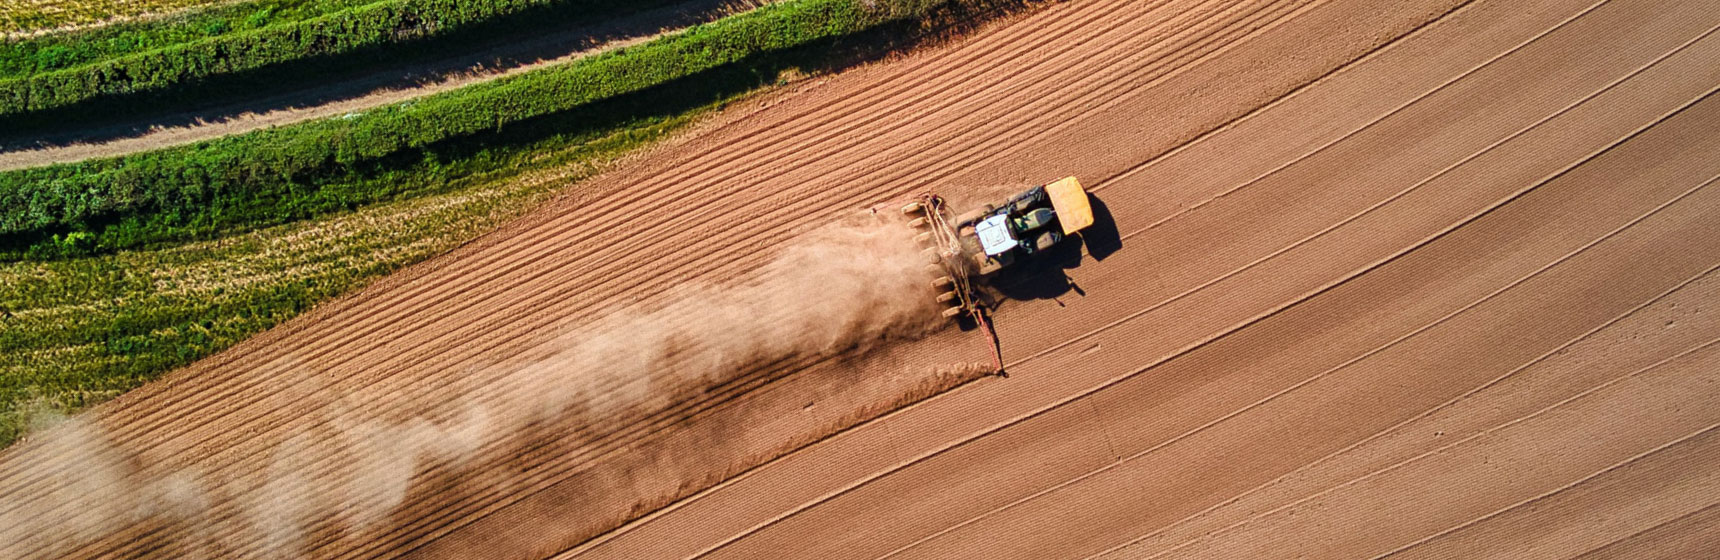 Aerial View of Tractor on Farm